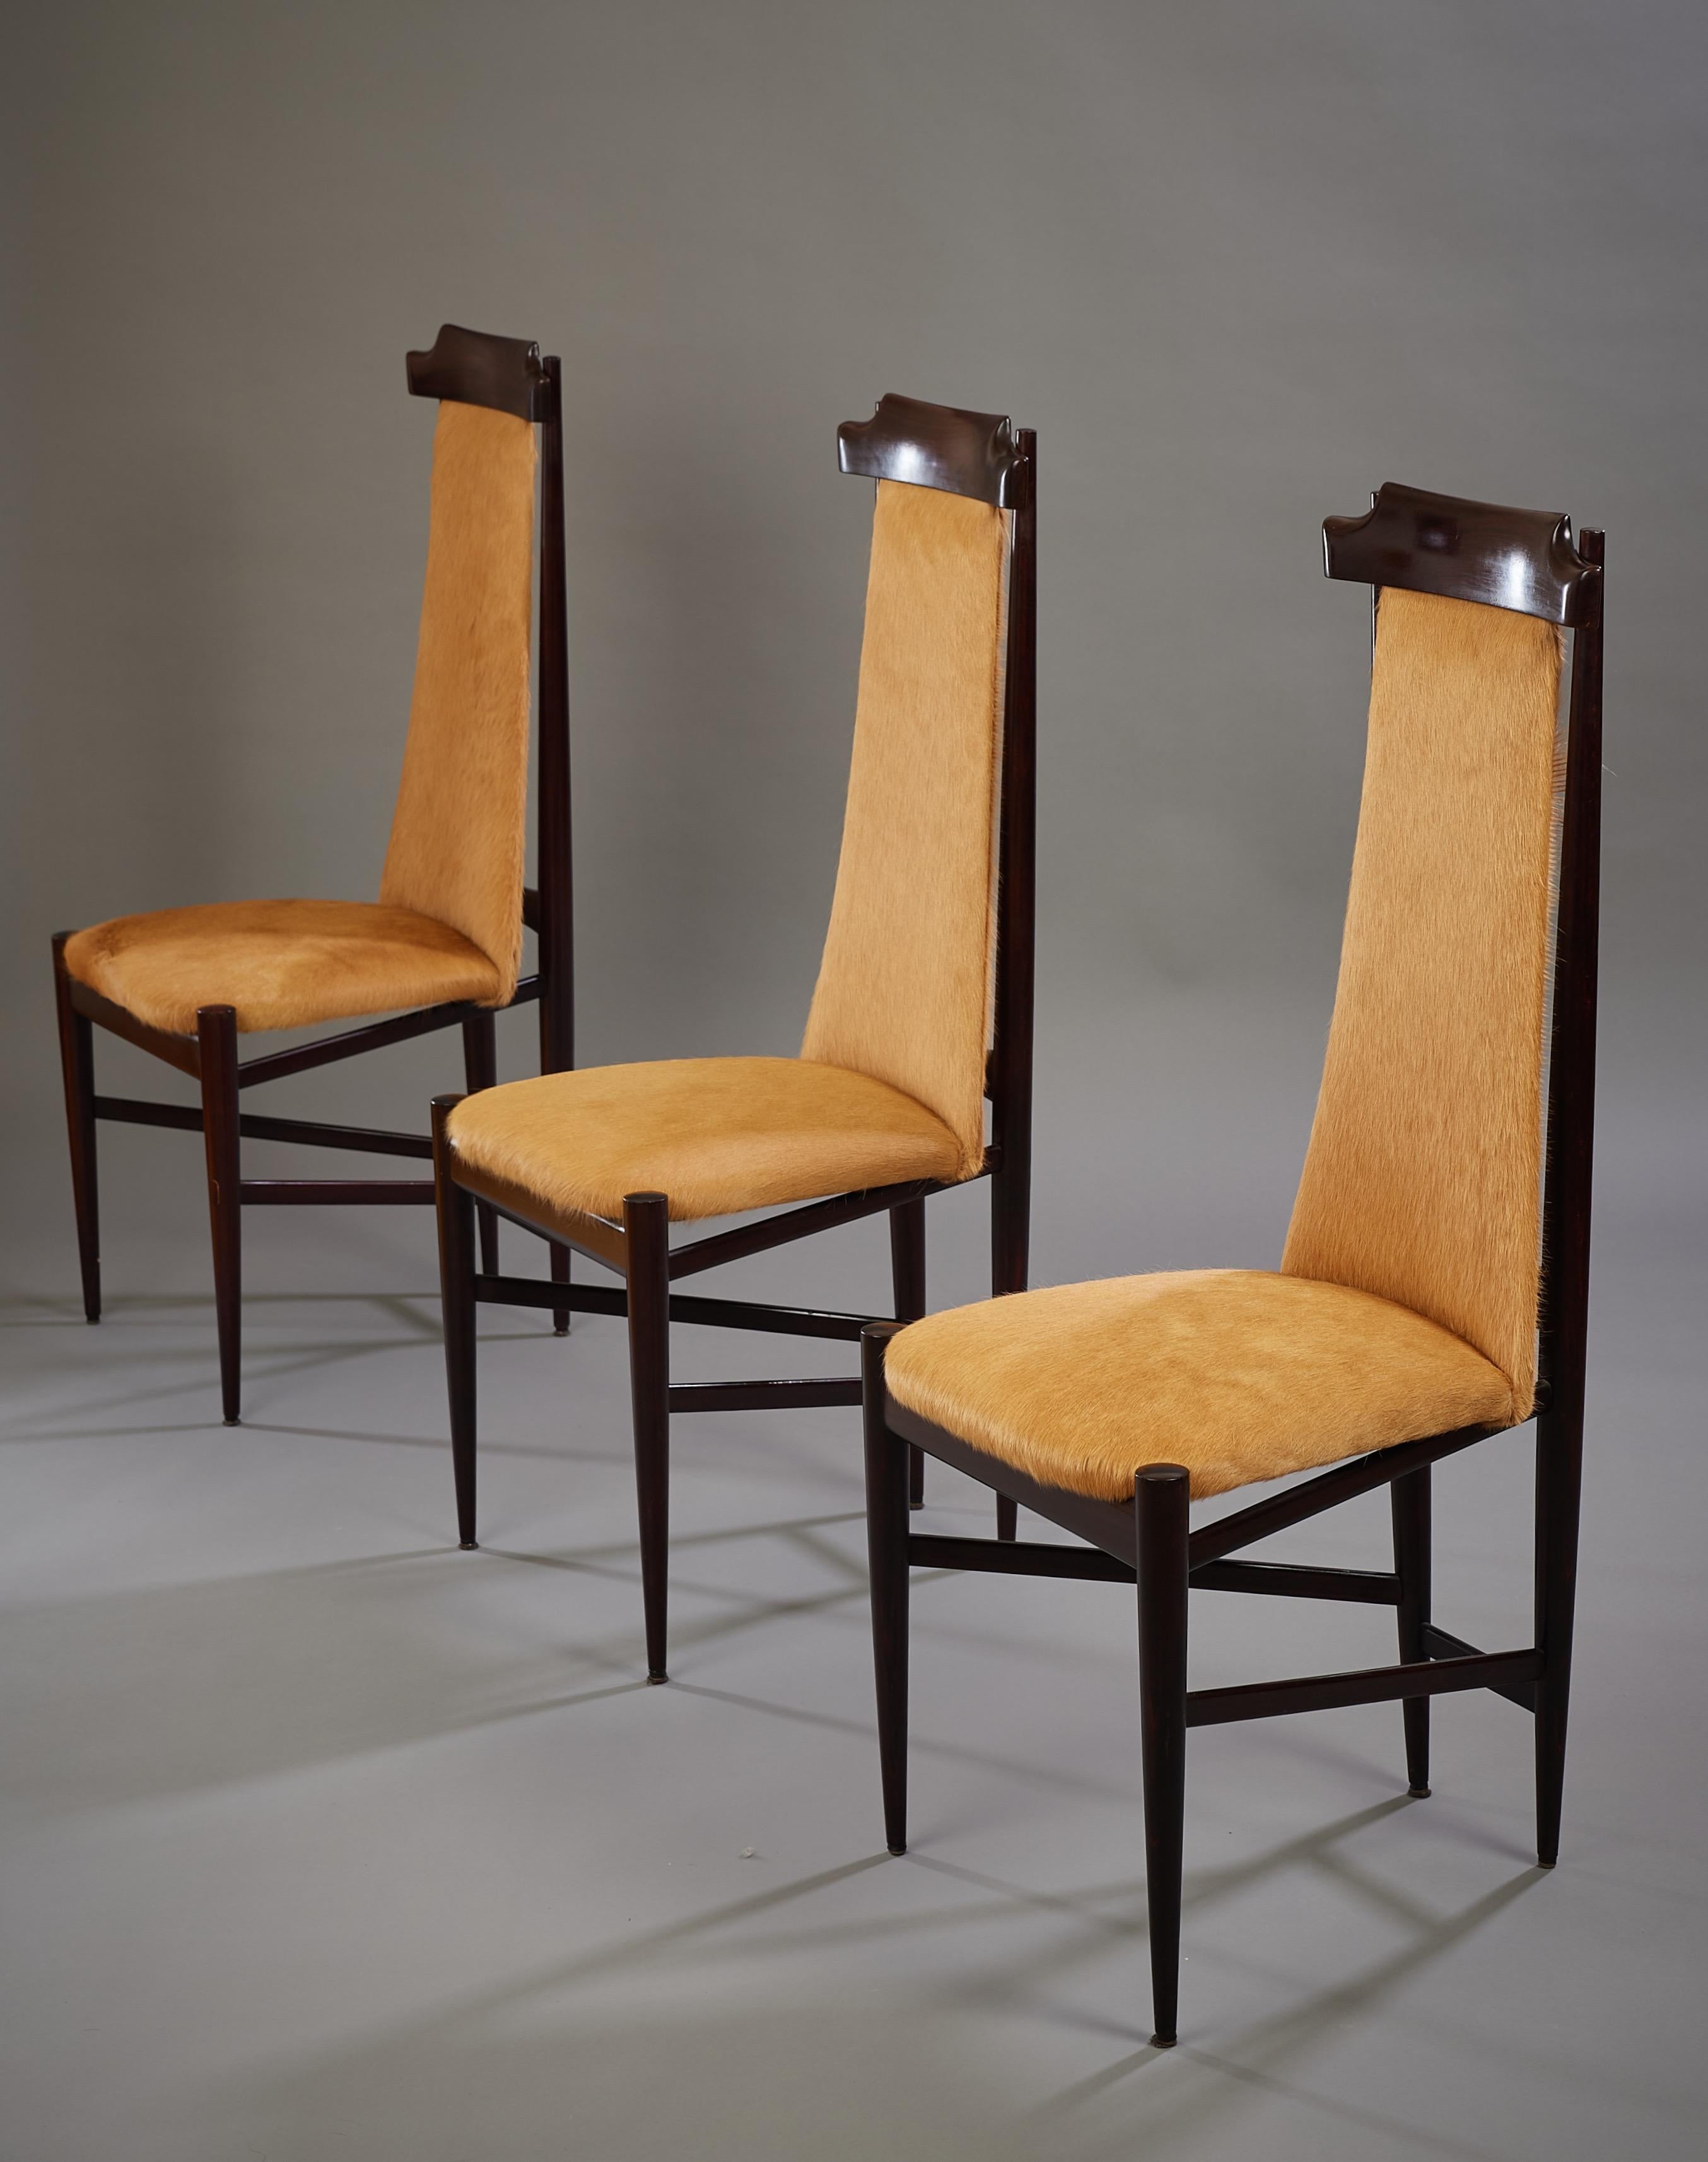 Sergio Rodrigues Six Dining Chairs in Wood and Tan Cowhide, Brazil, 1960s For Sale 5